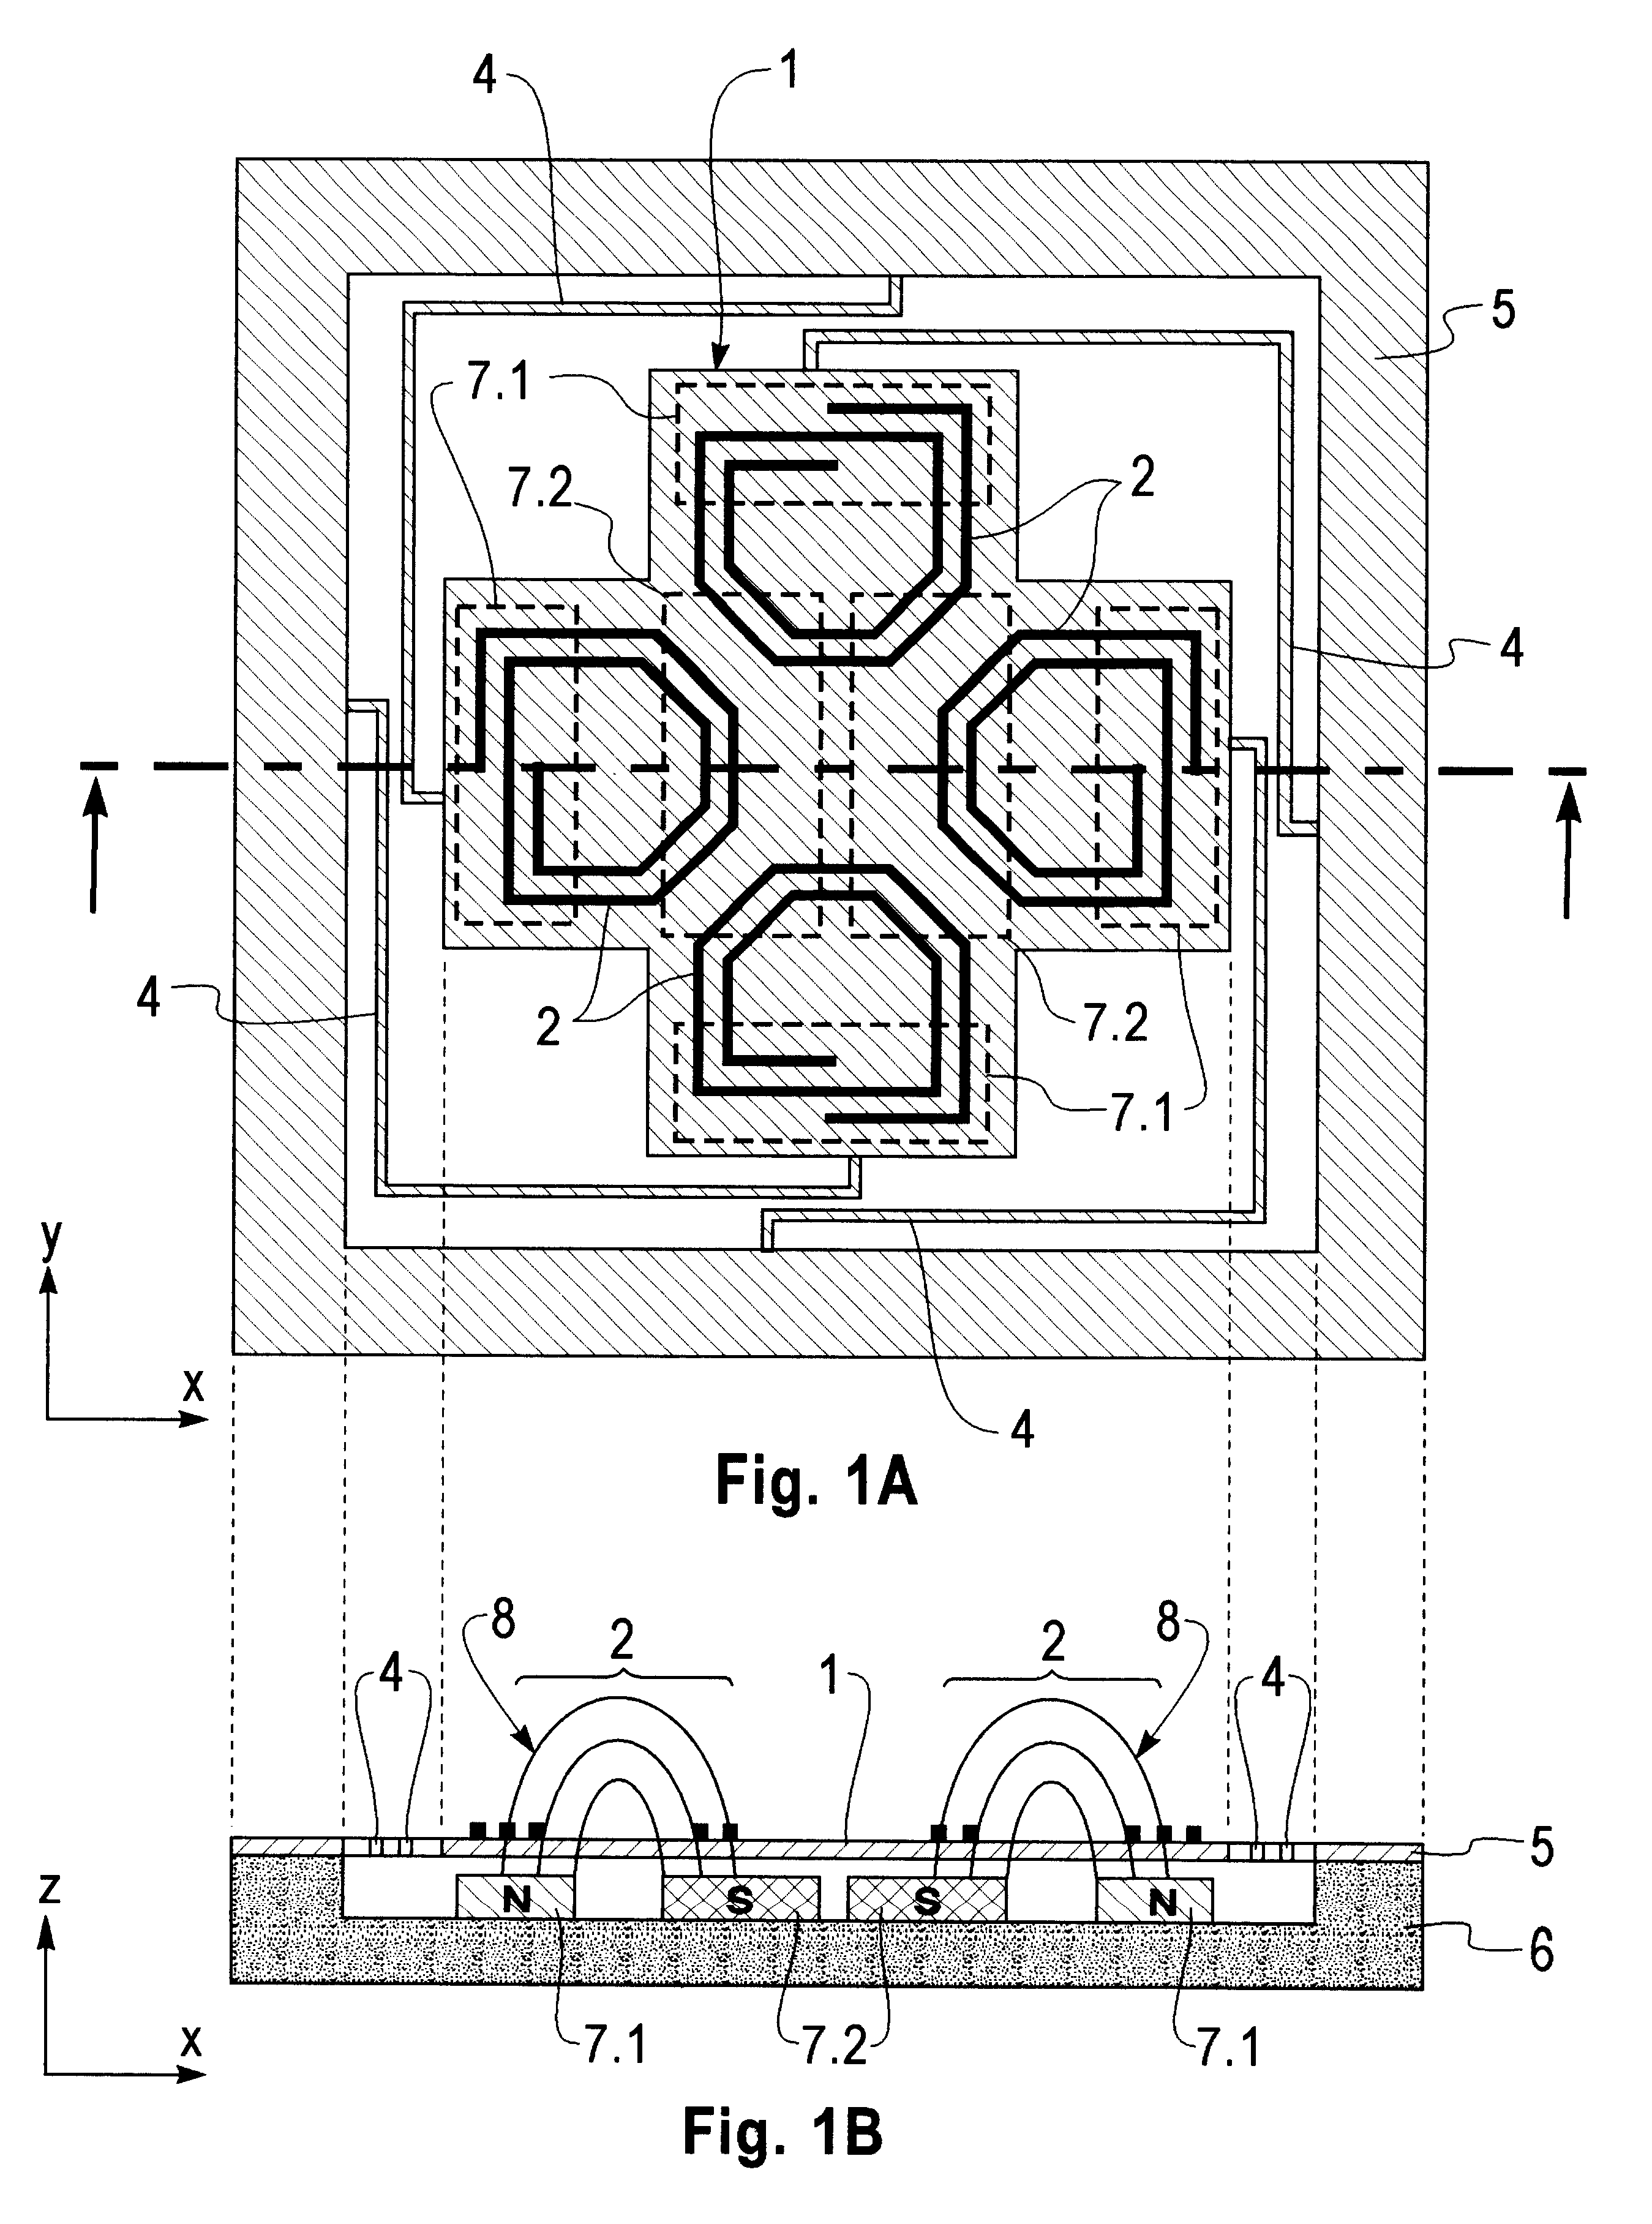 Magnetic scanning or positioning system with at least two degrees of freedom